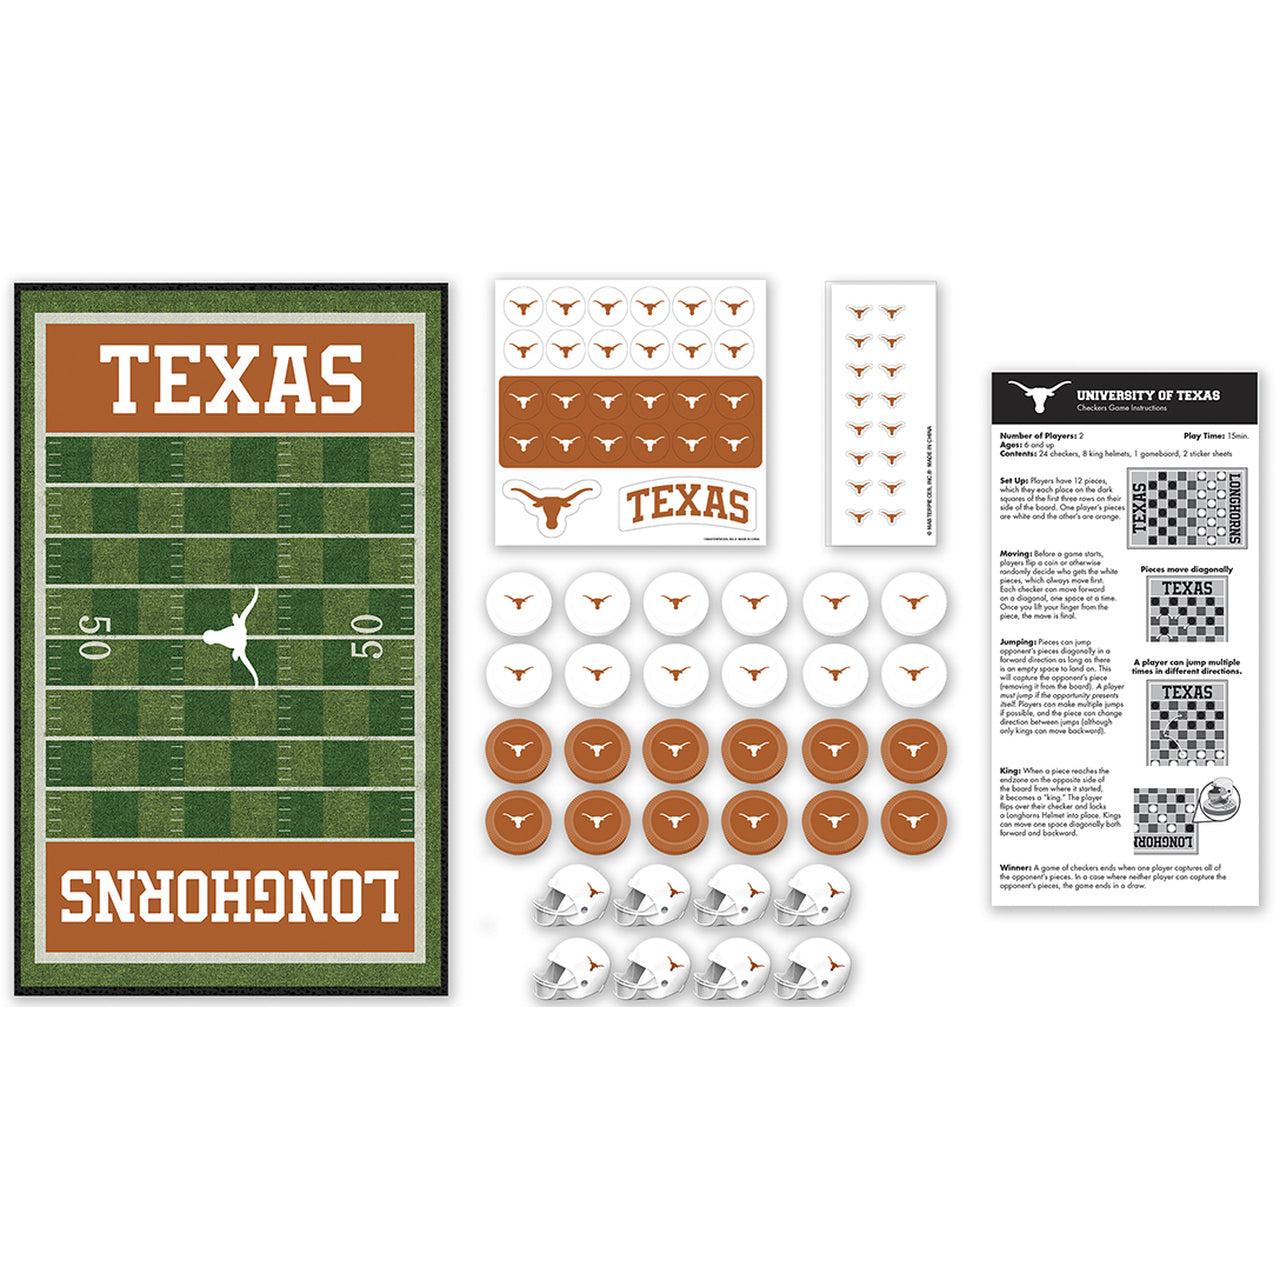 Texas Longhorns Checkers Board Game by Masterrpieces